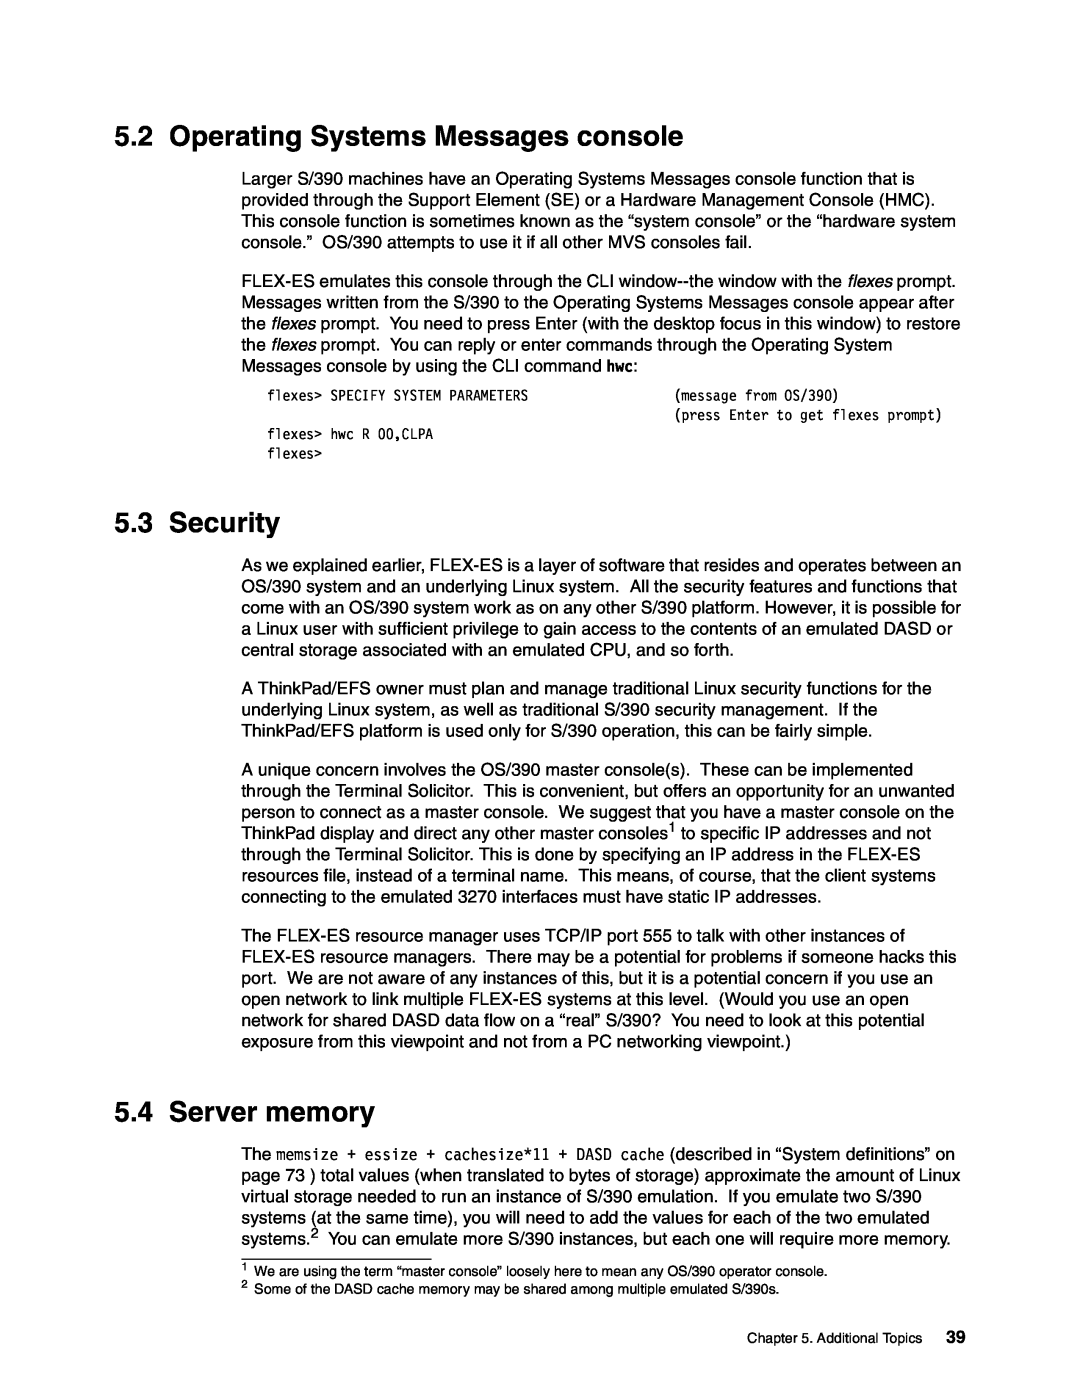 IBM s/390 manual Operating Systems Messages console, Security, Server memory 